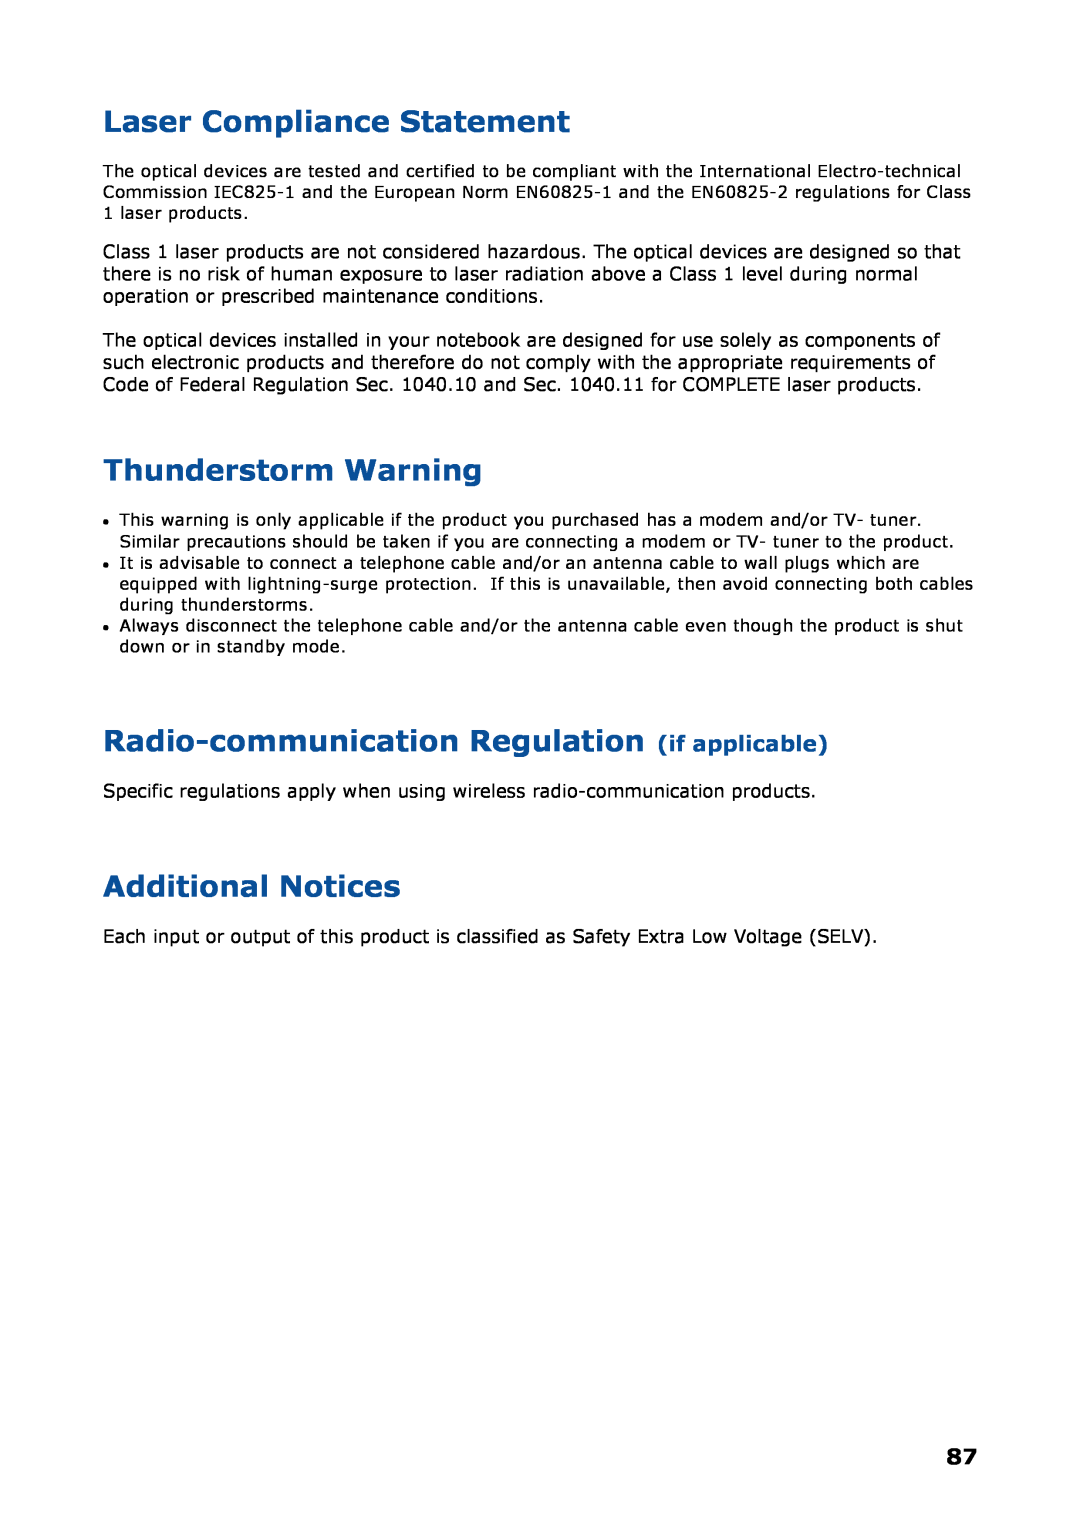 NEC P8510 manual Laser Compliance Statement, Thunderstorm Warning, Radio-communication Regulation if applicable 